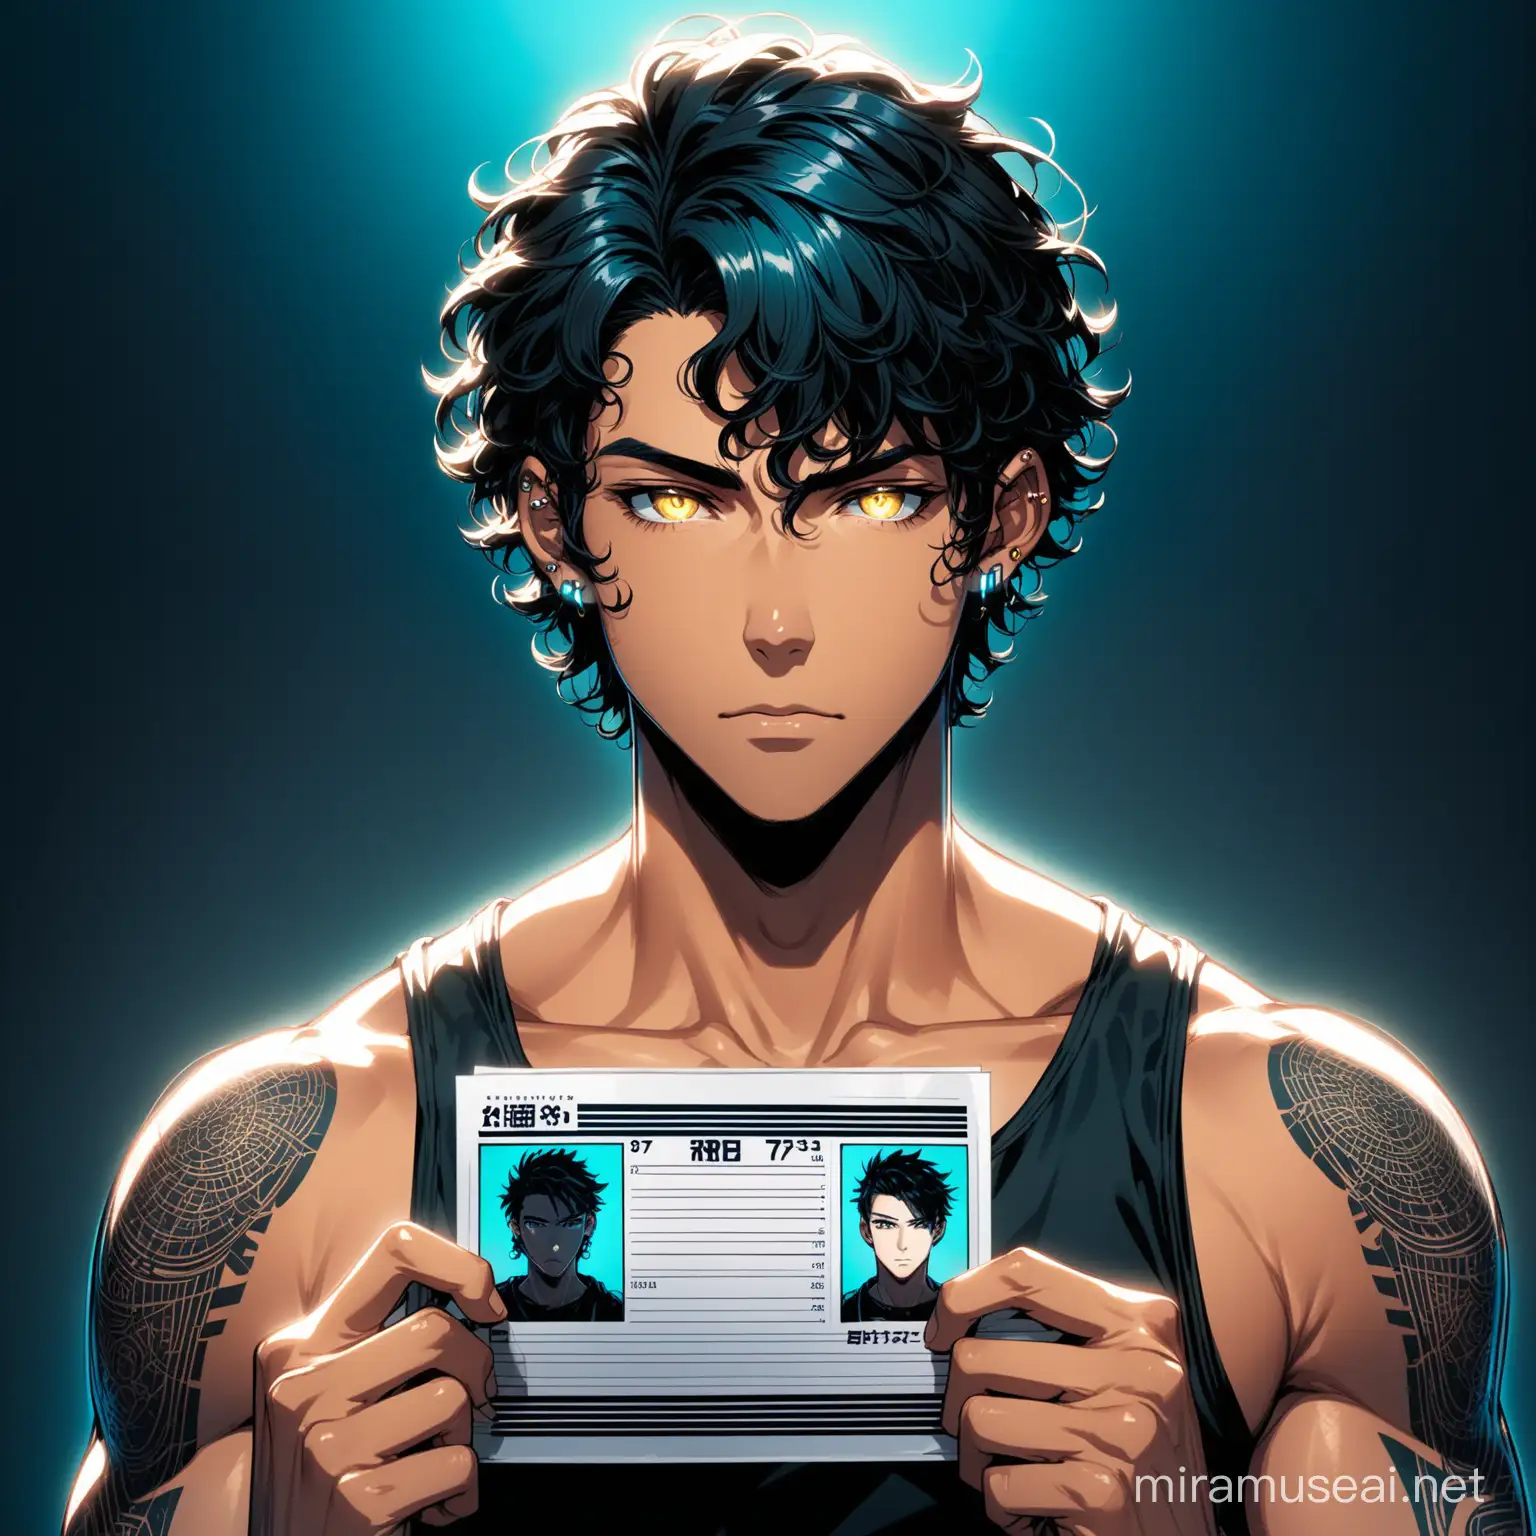 Futuristic Cyberpunk Mugshot Handsome Young Man with Golden Eyes and Tattoos